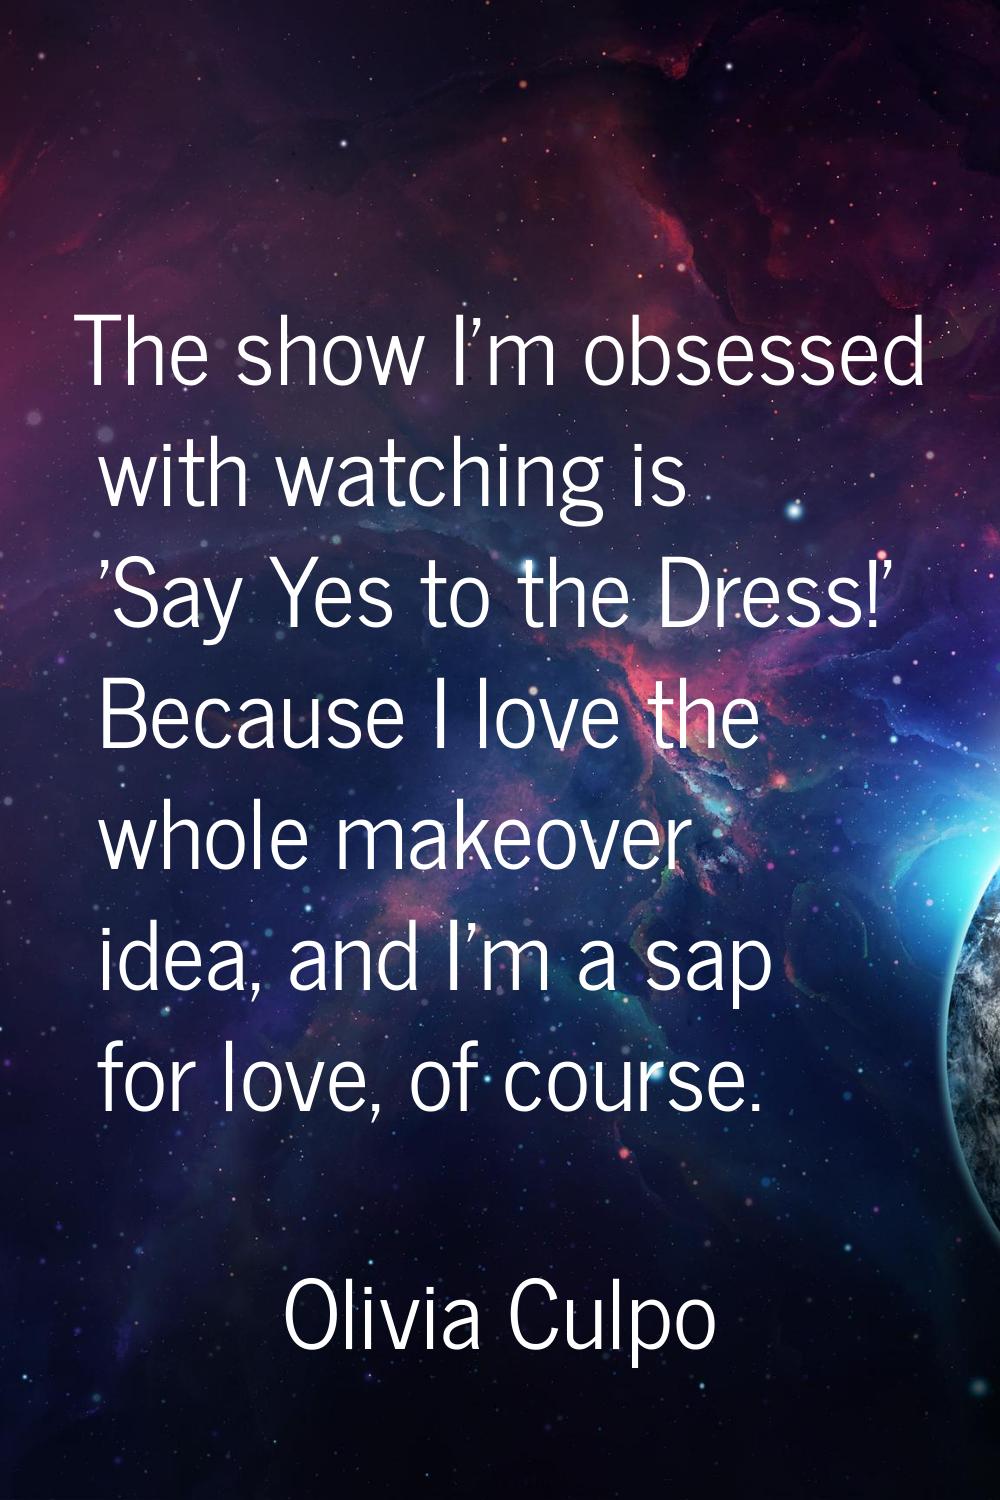 The show I'm obsessed with watching is 'Say Yes to the Dress!' Because I love the whole makeover id